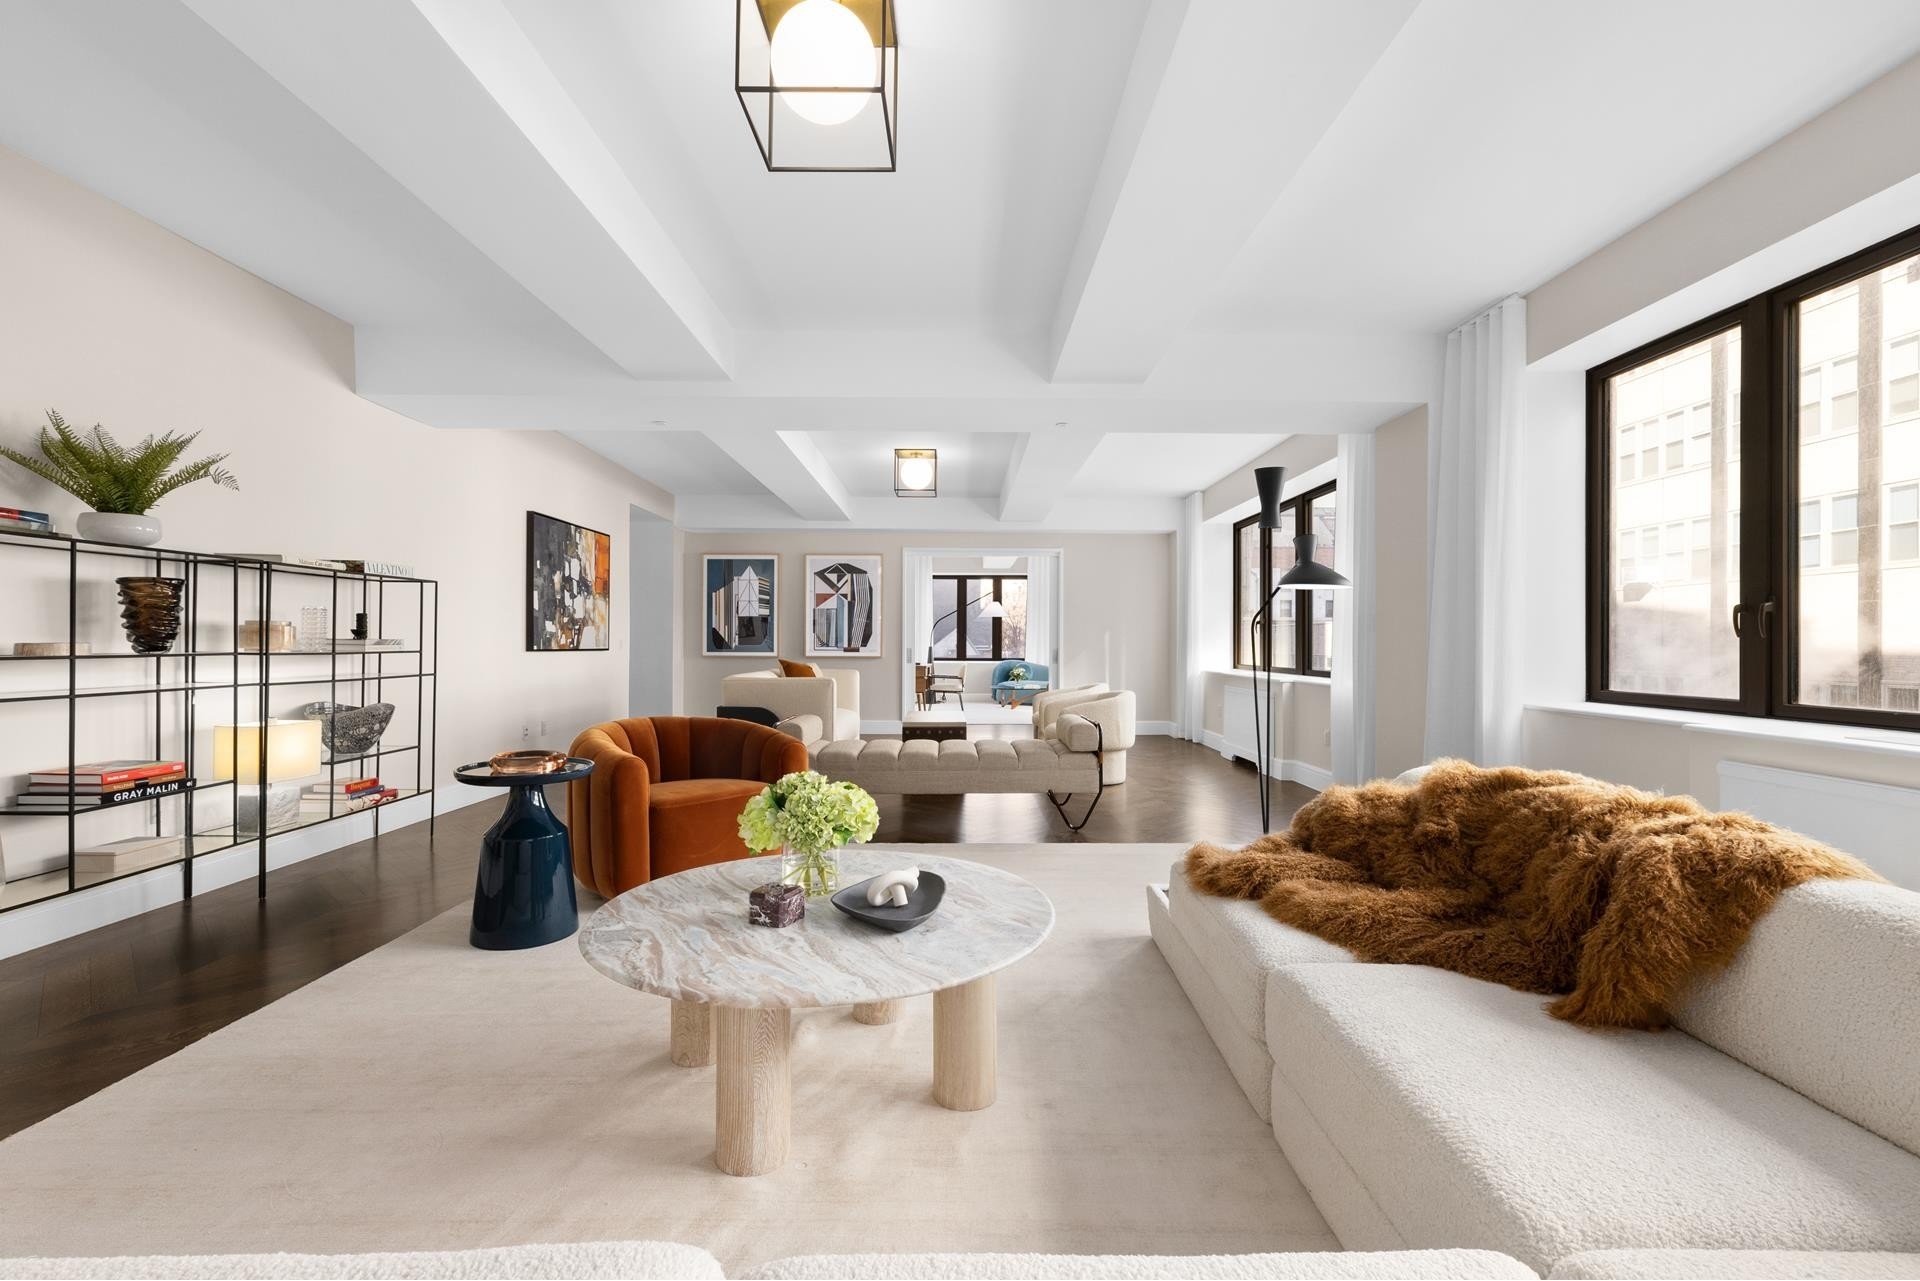 Condominium for Sale at The Boutique at Gramercy Square, 220 E 20TH ST, 4 Gramercy Park, New York, NY 10003